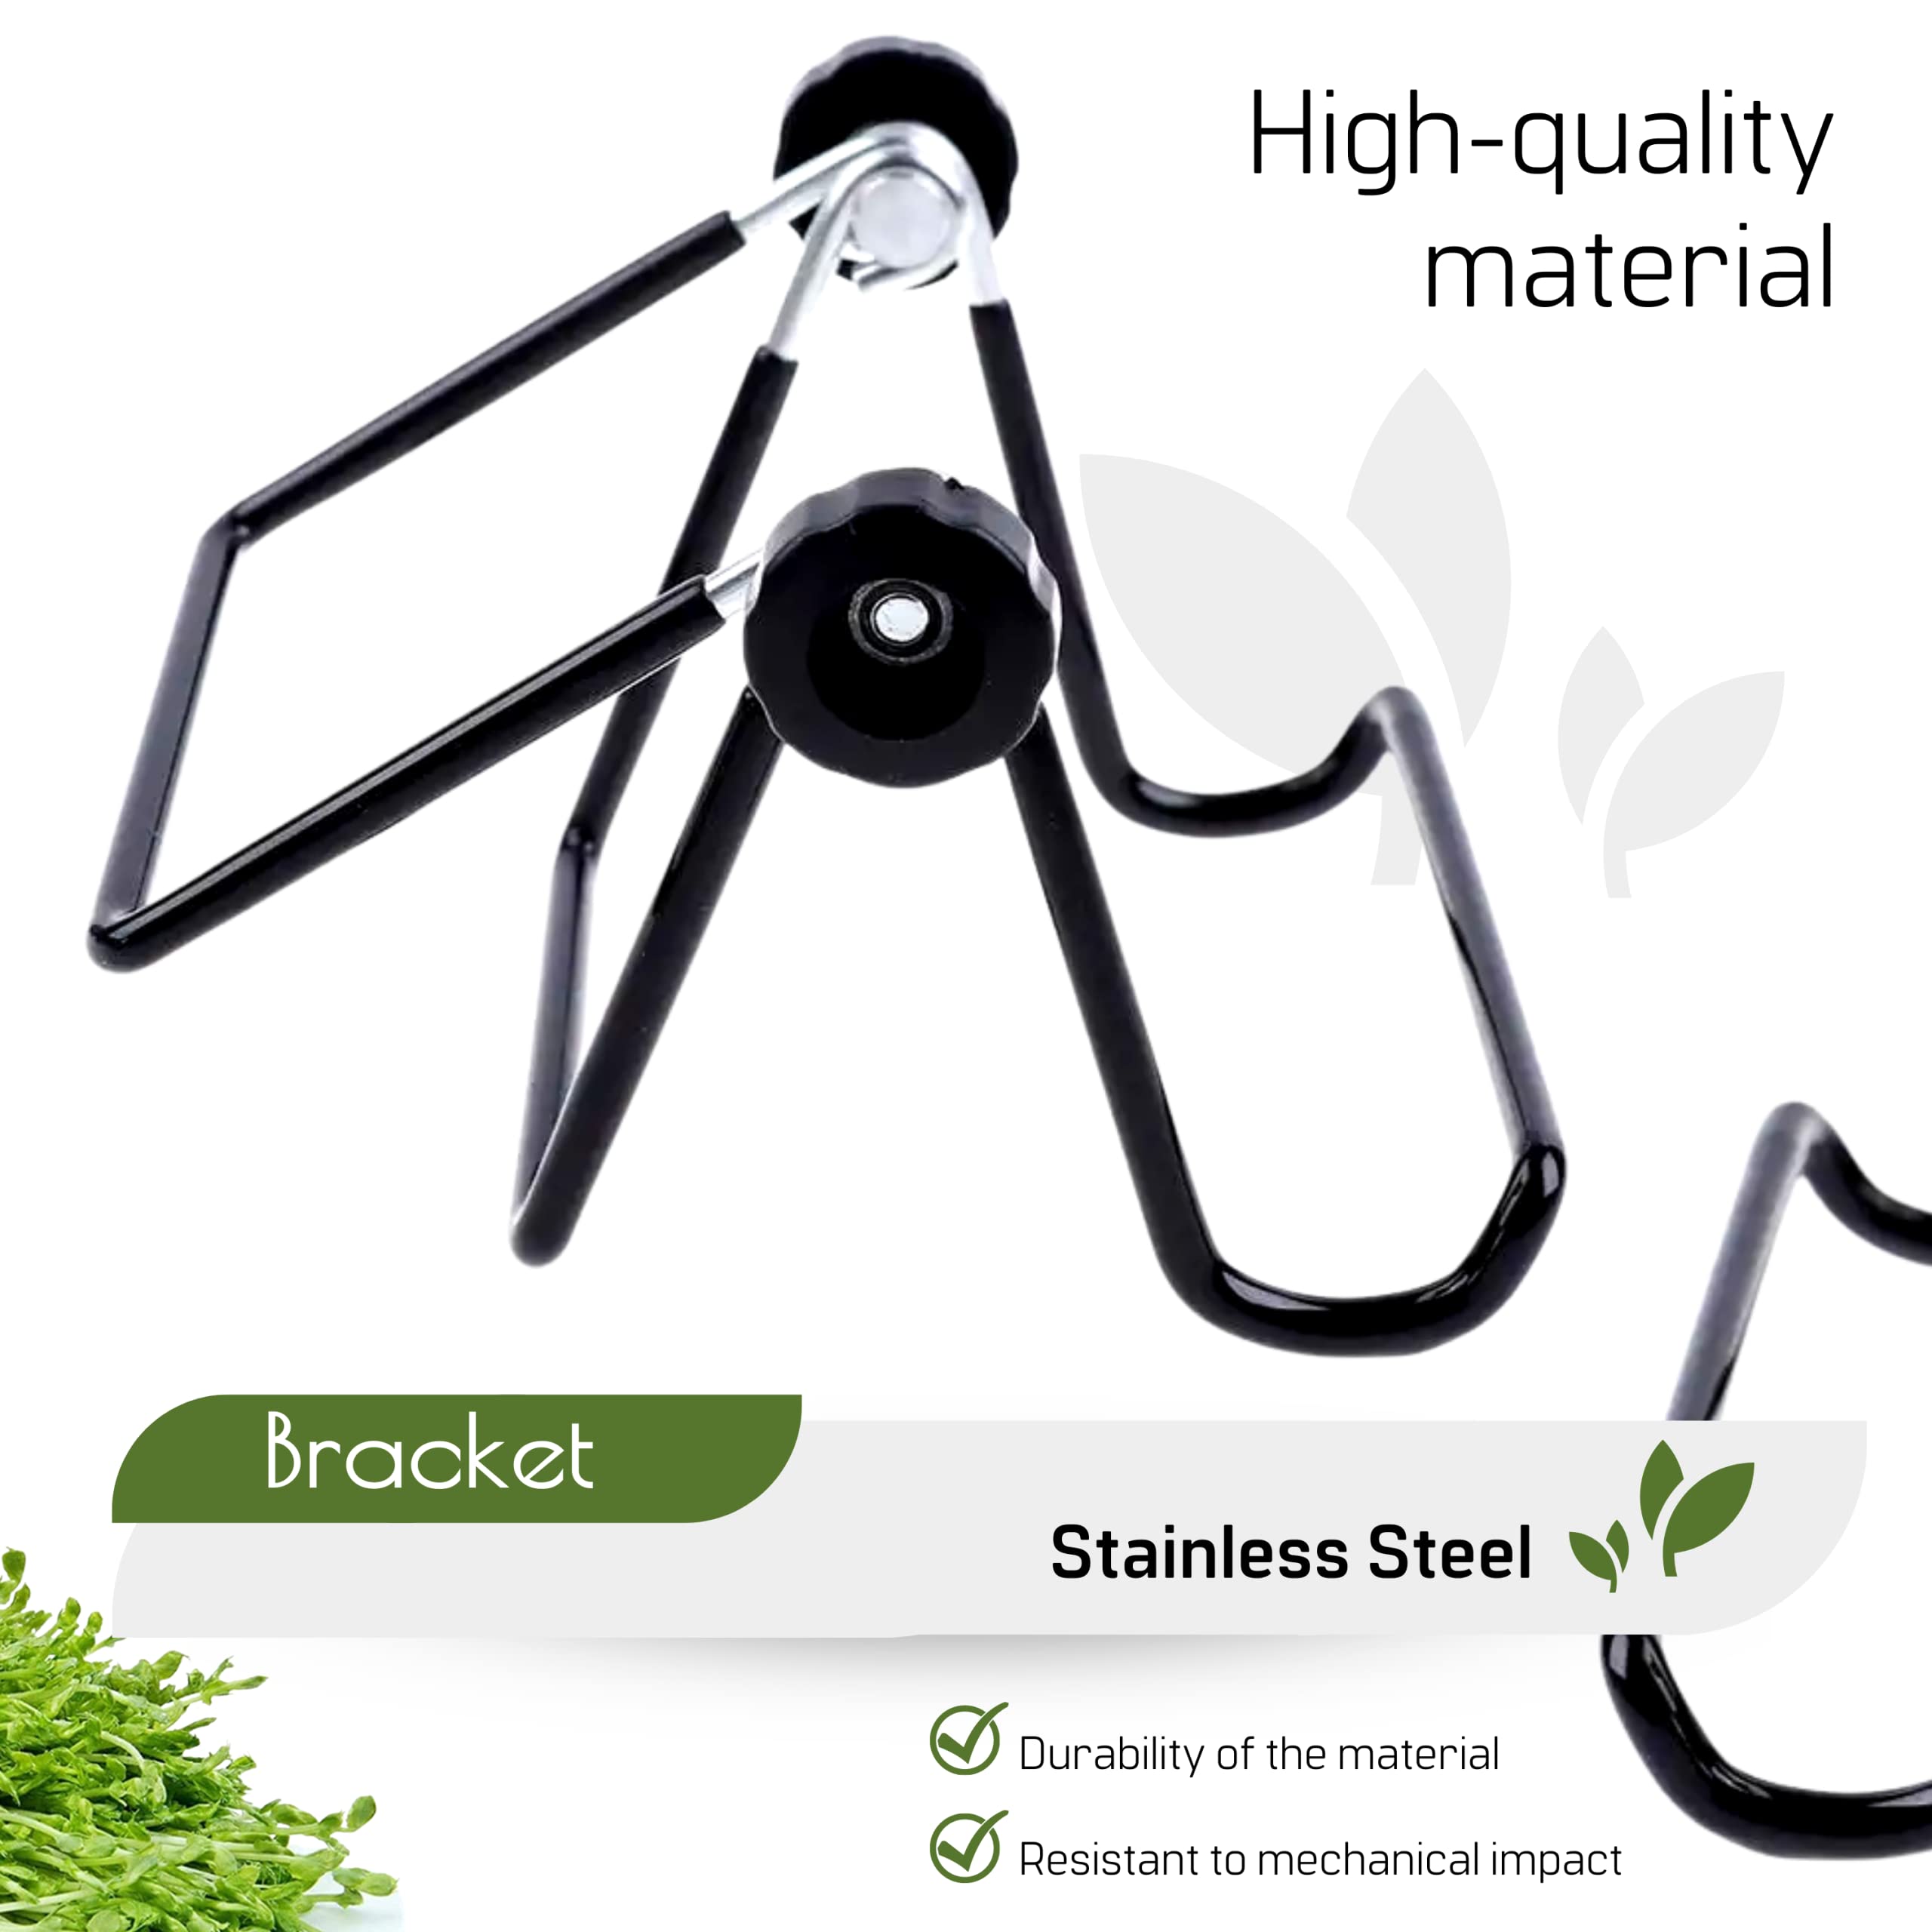 2PCS Sprouting Stands for Mason Jar – Sprouting Kit Stainless Steel Stand Kit for Sprouts Growing Kit 2 Mason Jar Holders for Wide and Regular Mouth Mason Jars